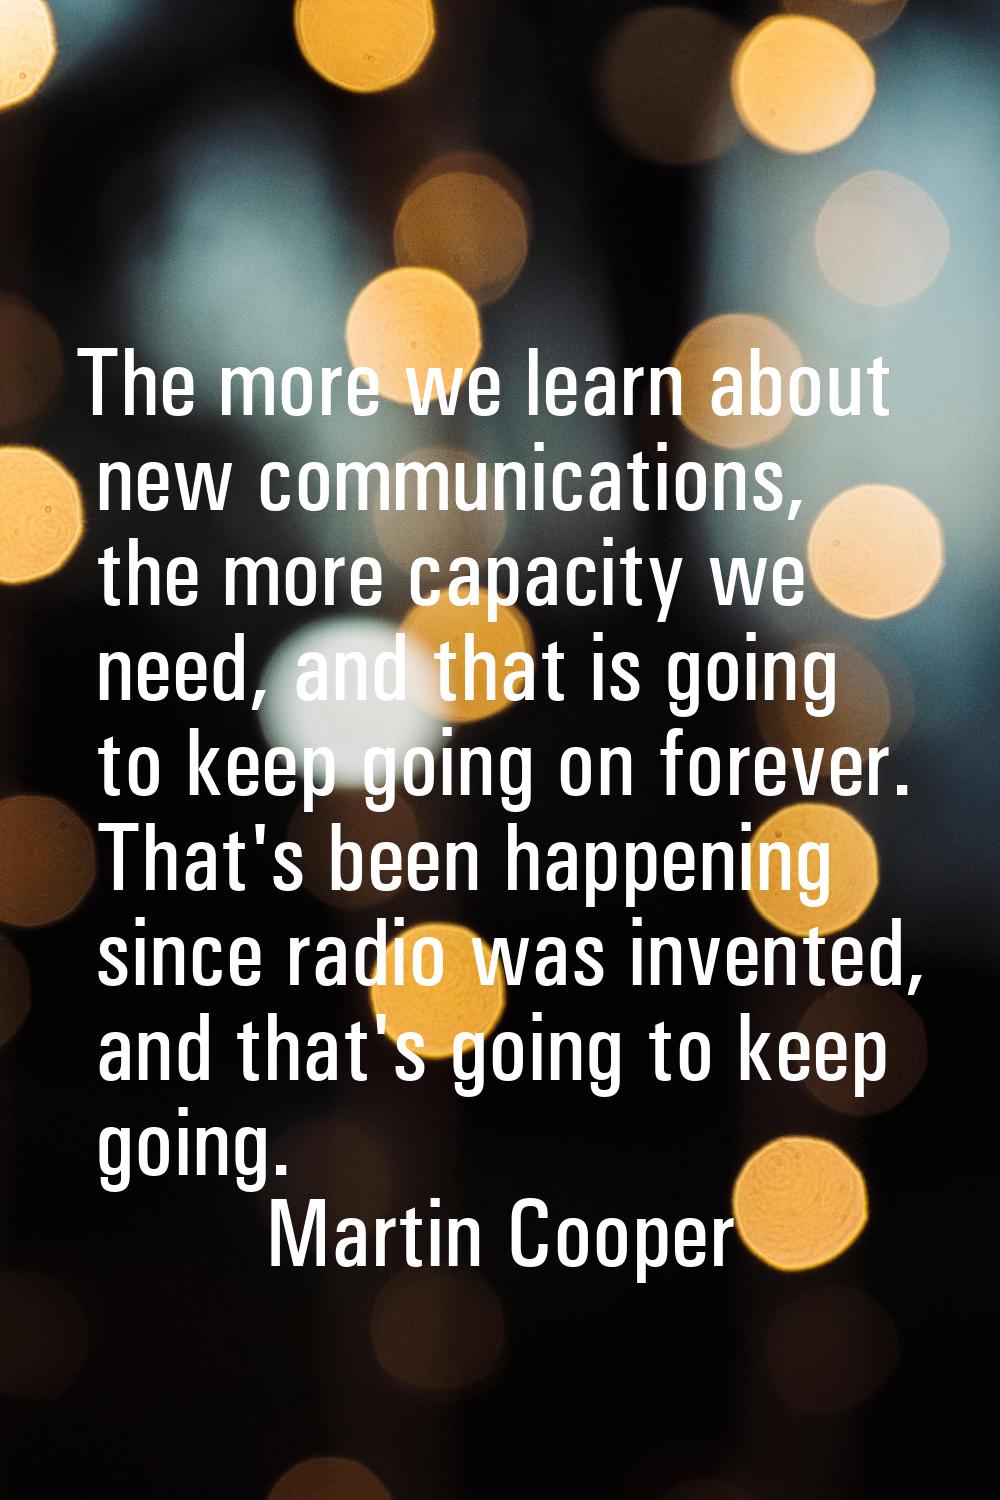 The more we learn about new communications, the more capacity we need, and that is going to keep go